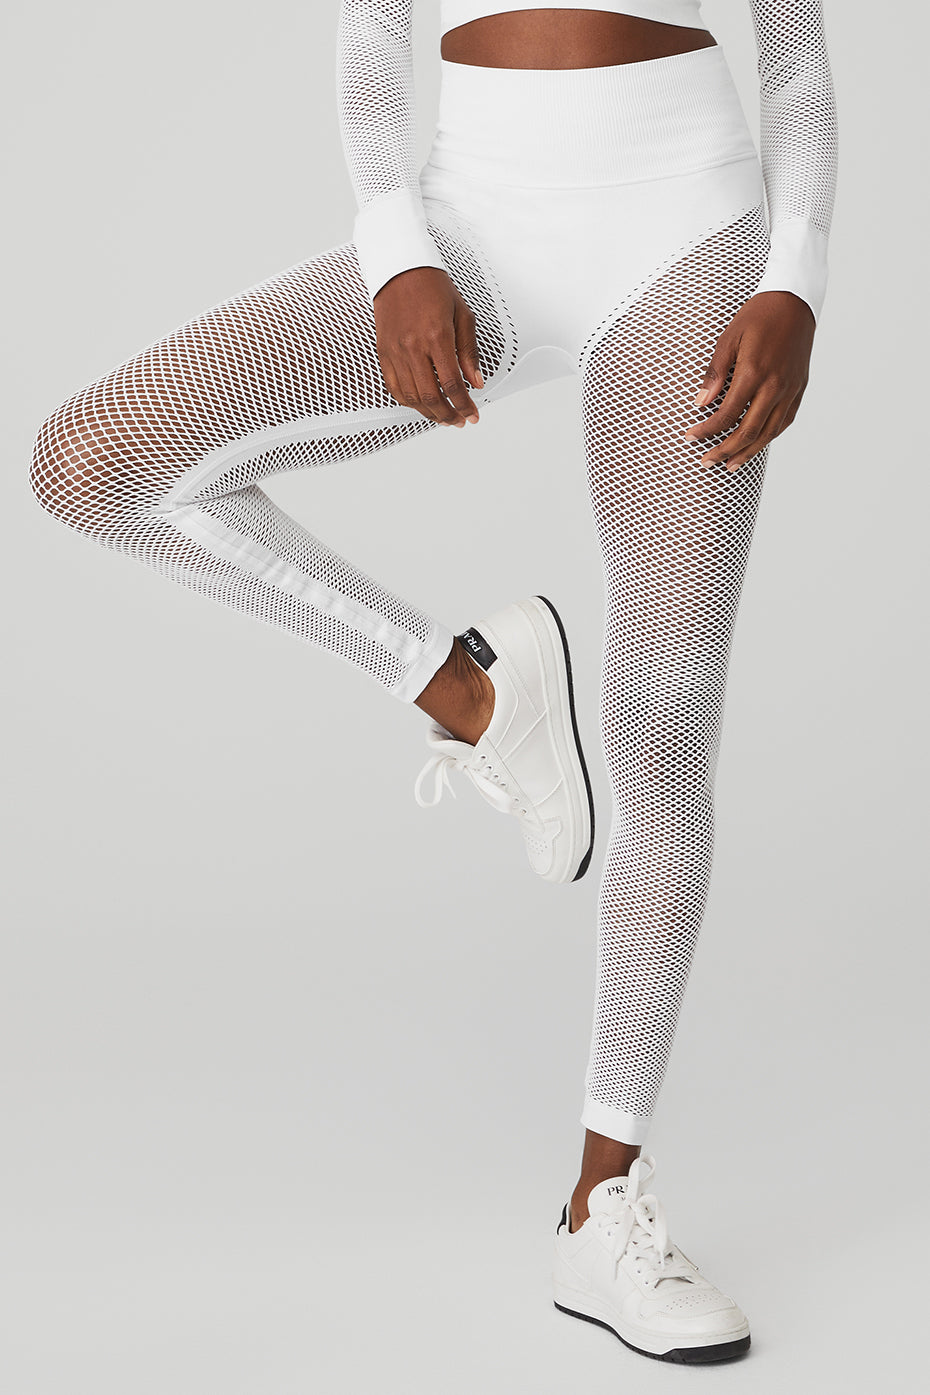 Alo Yoga on X: MESH MOVES- New elevated, airy details ace the to